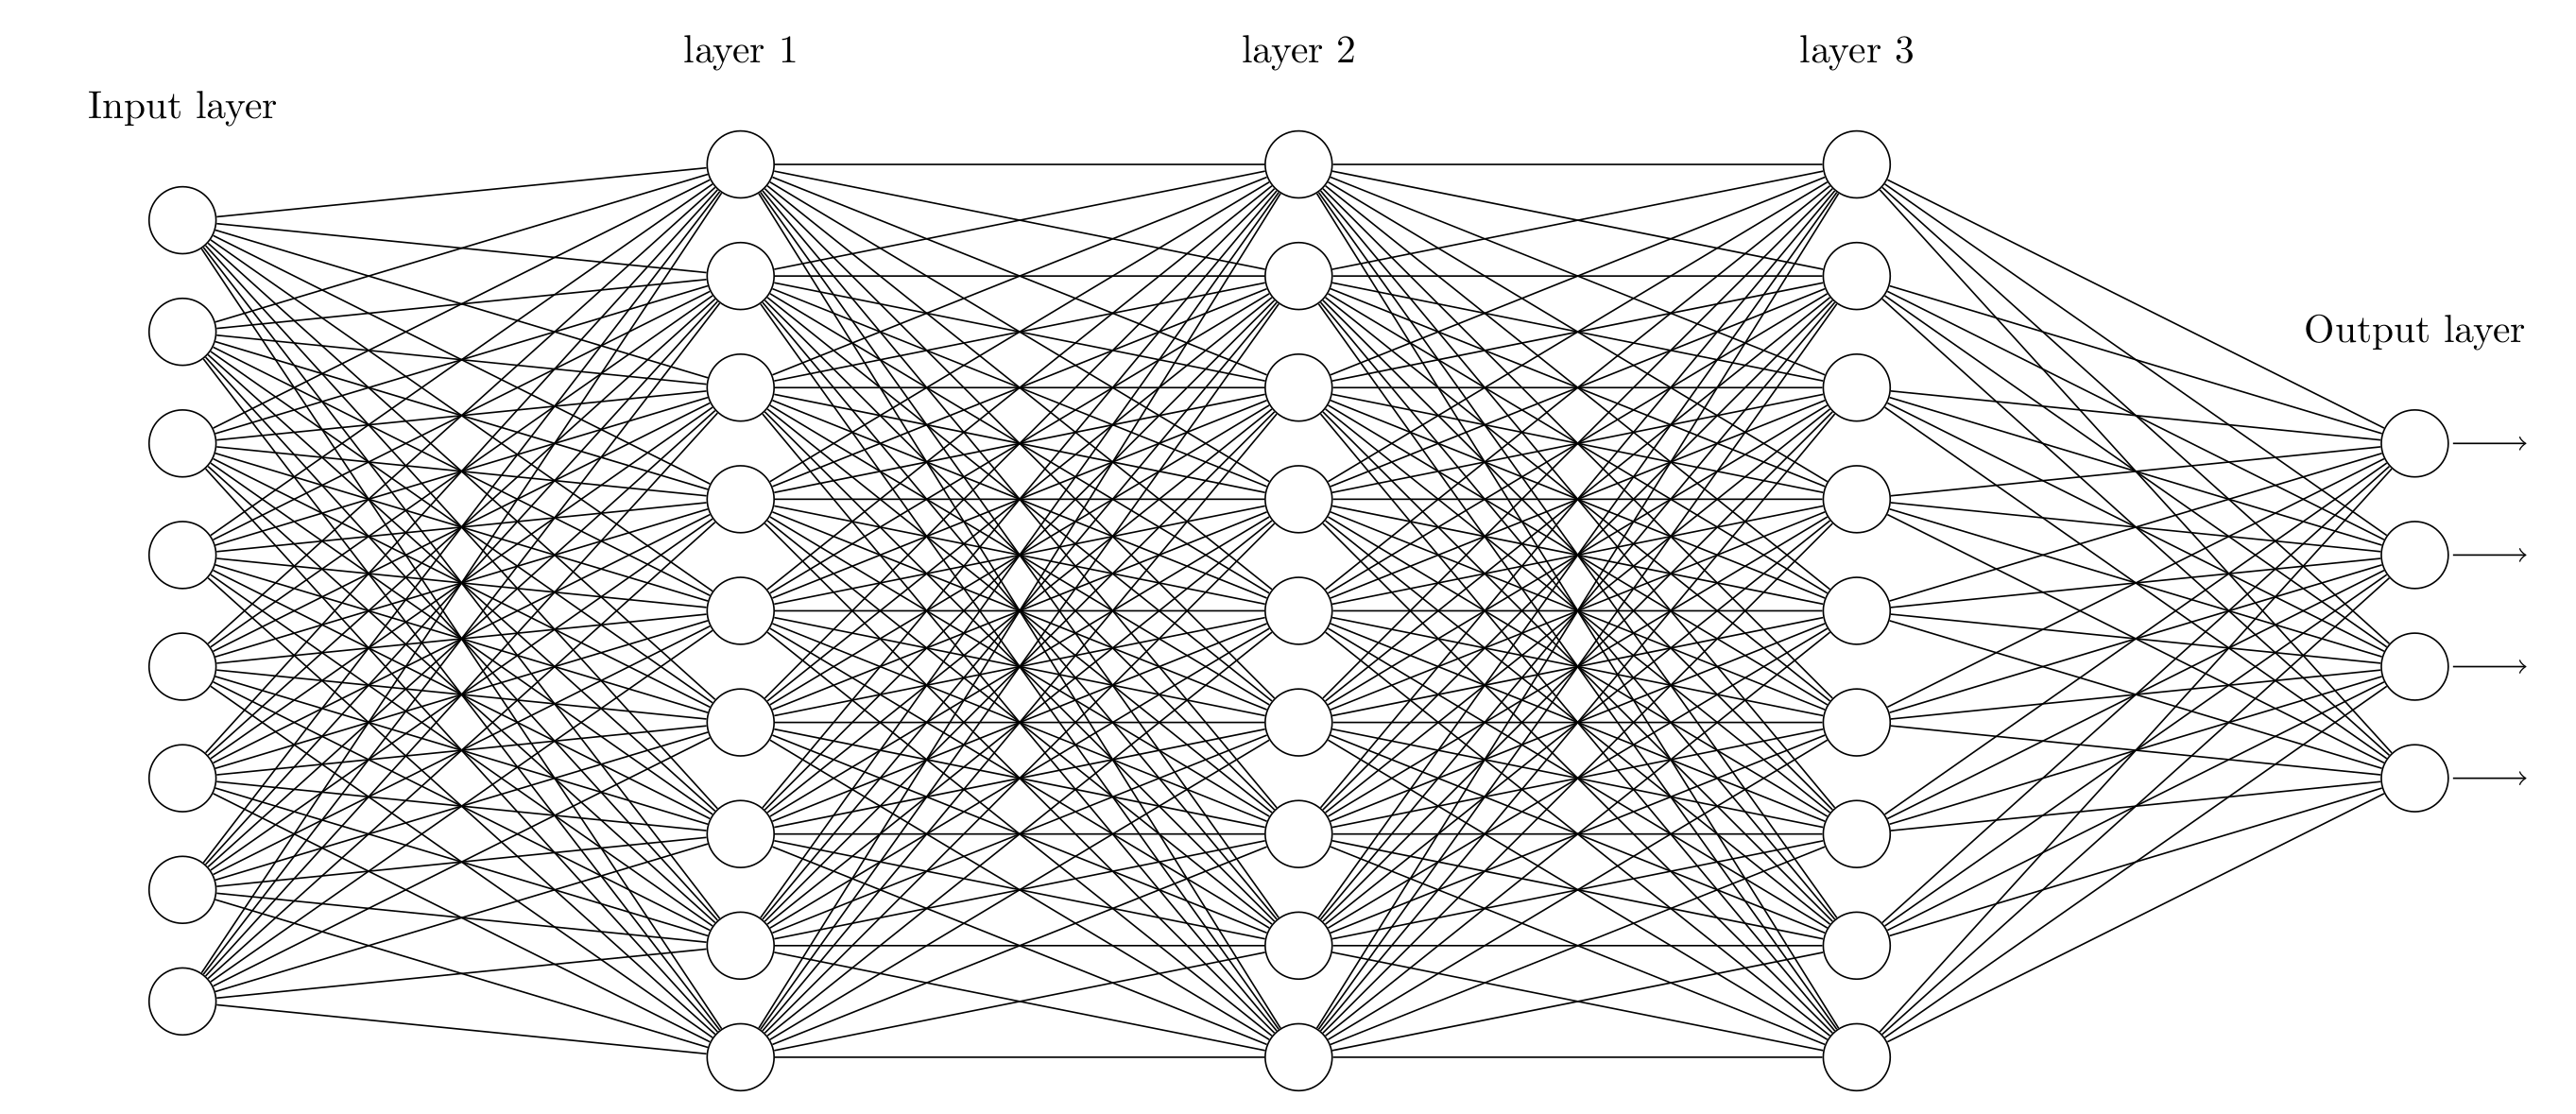 figure1.3.a_in_out_neural_network-1.png